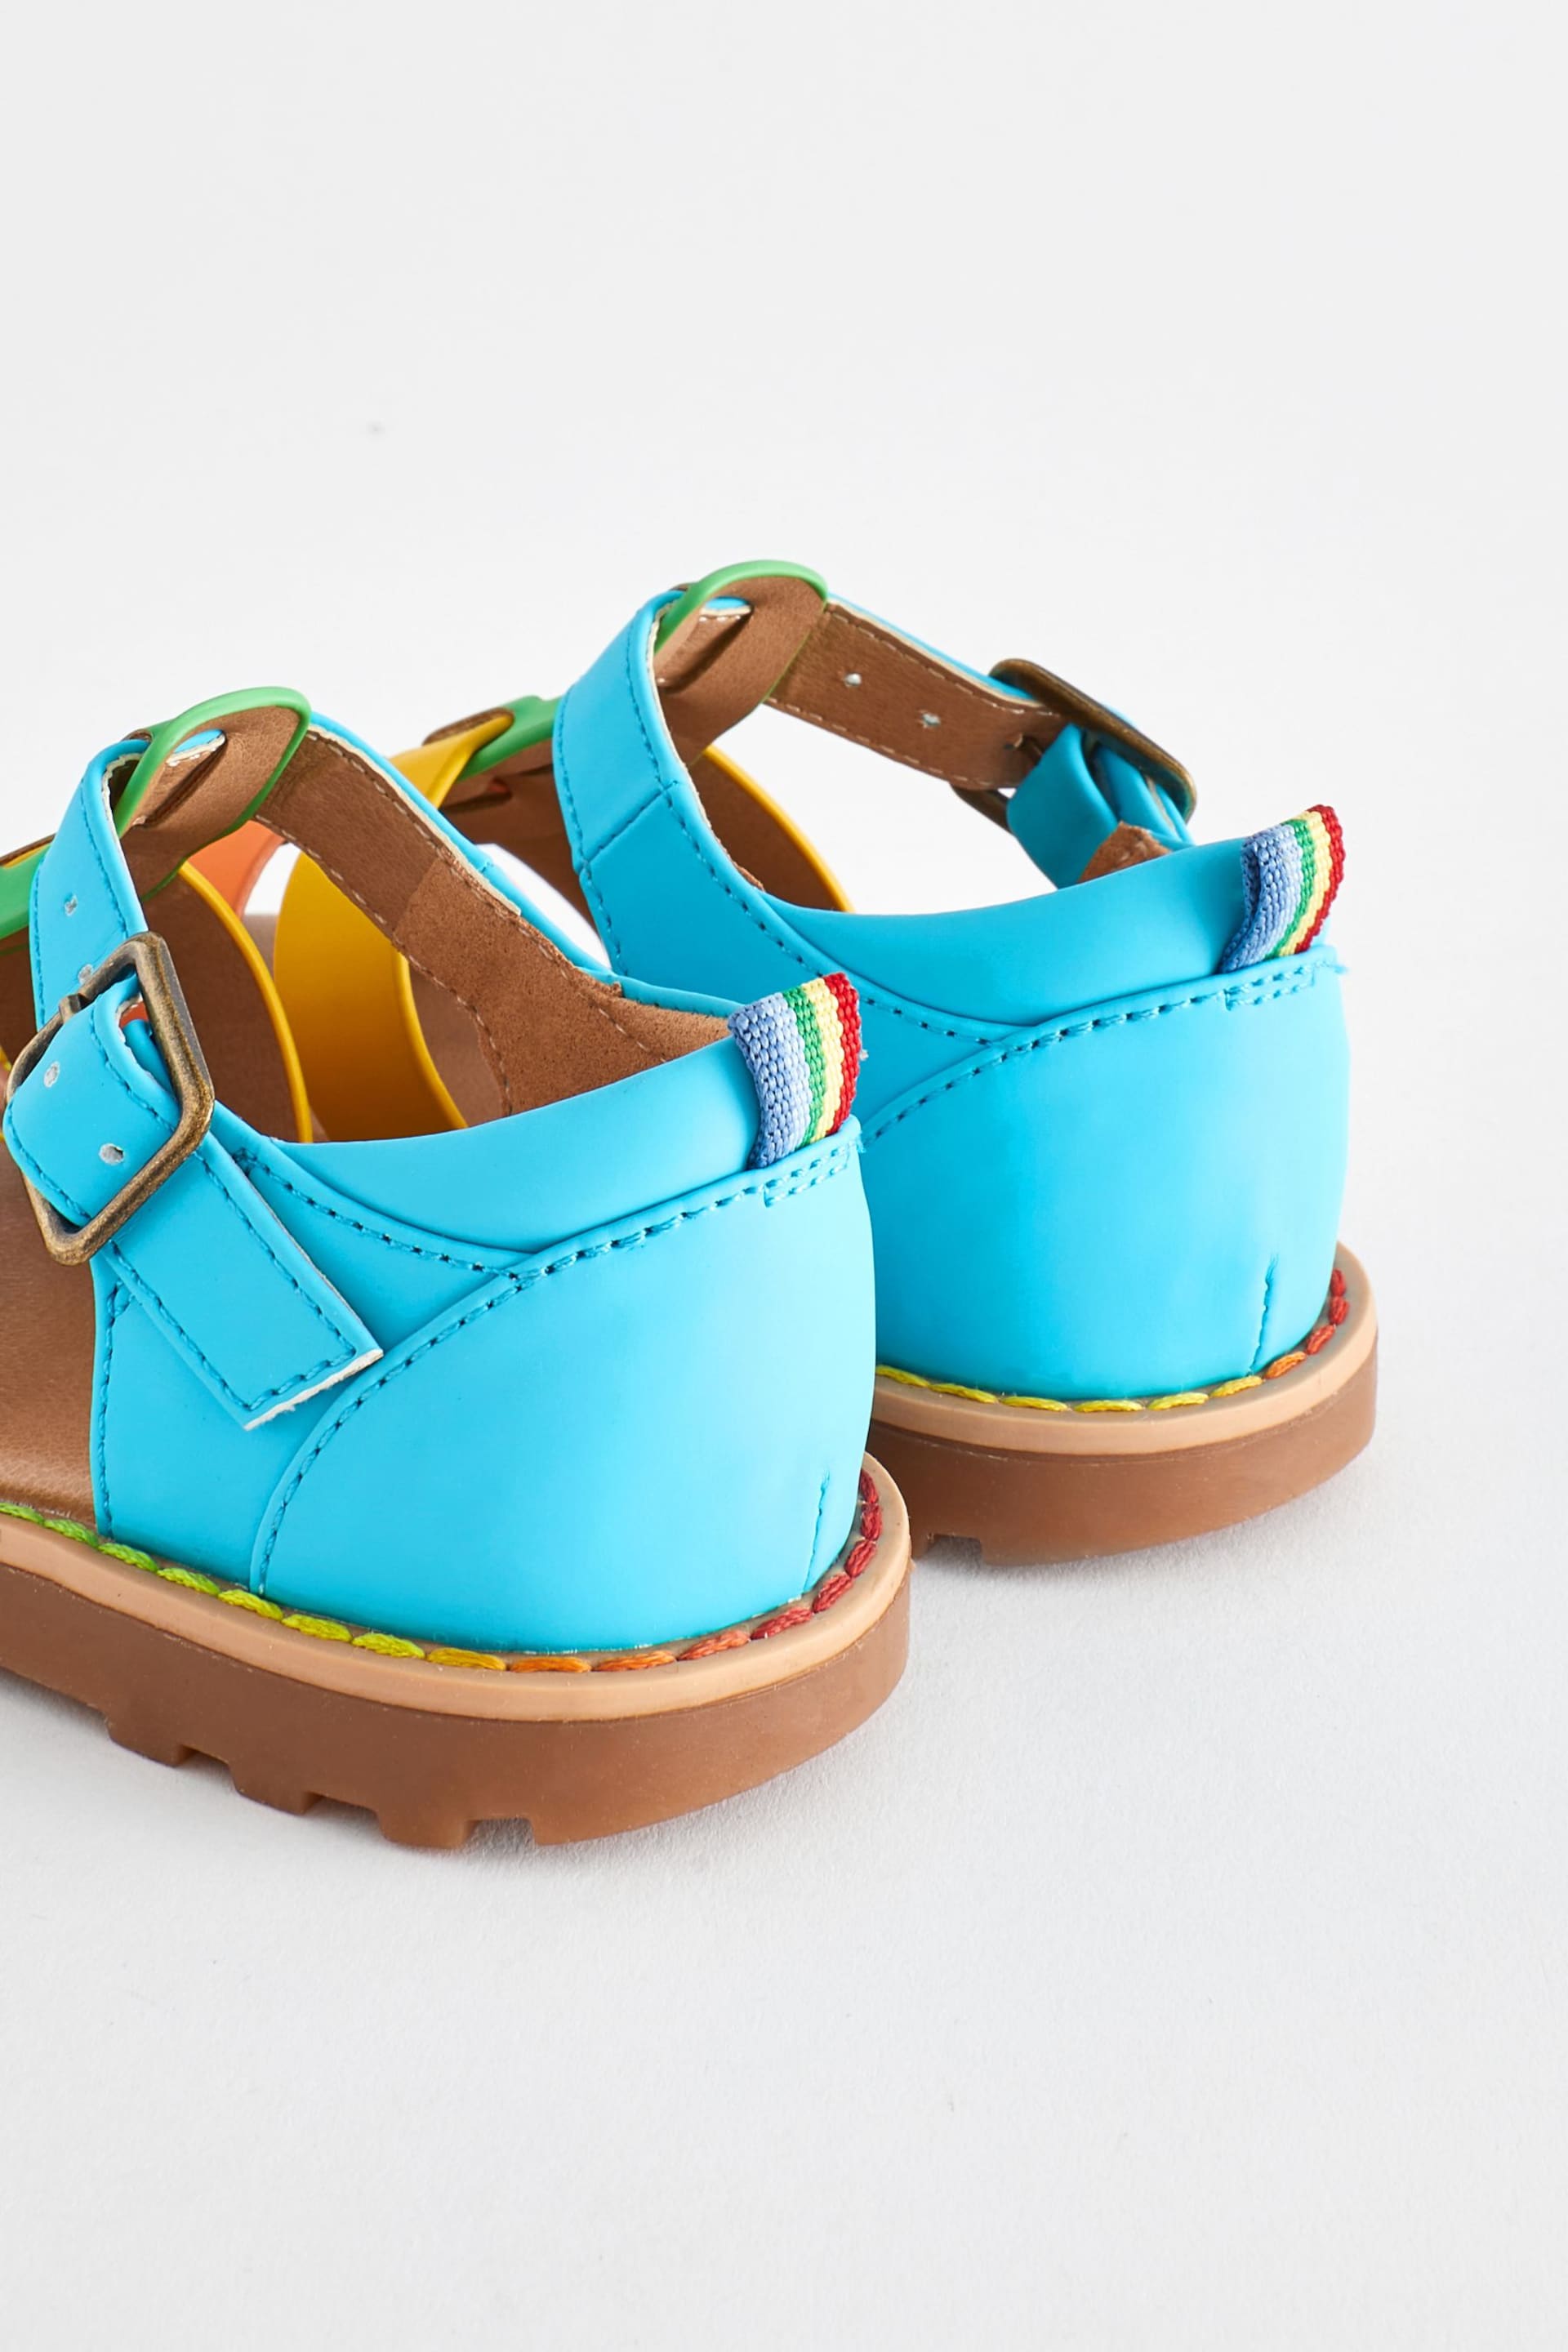 Little Bird by Jools Oliver Blue Fisherman Sandals - Image 3 of 6